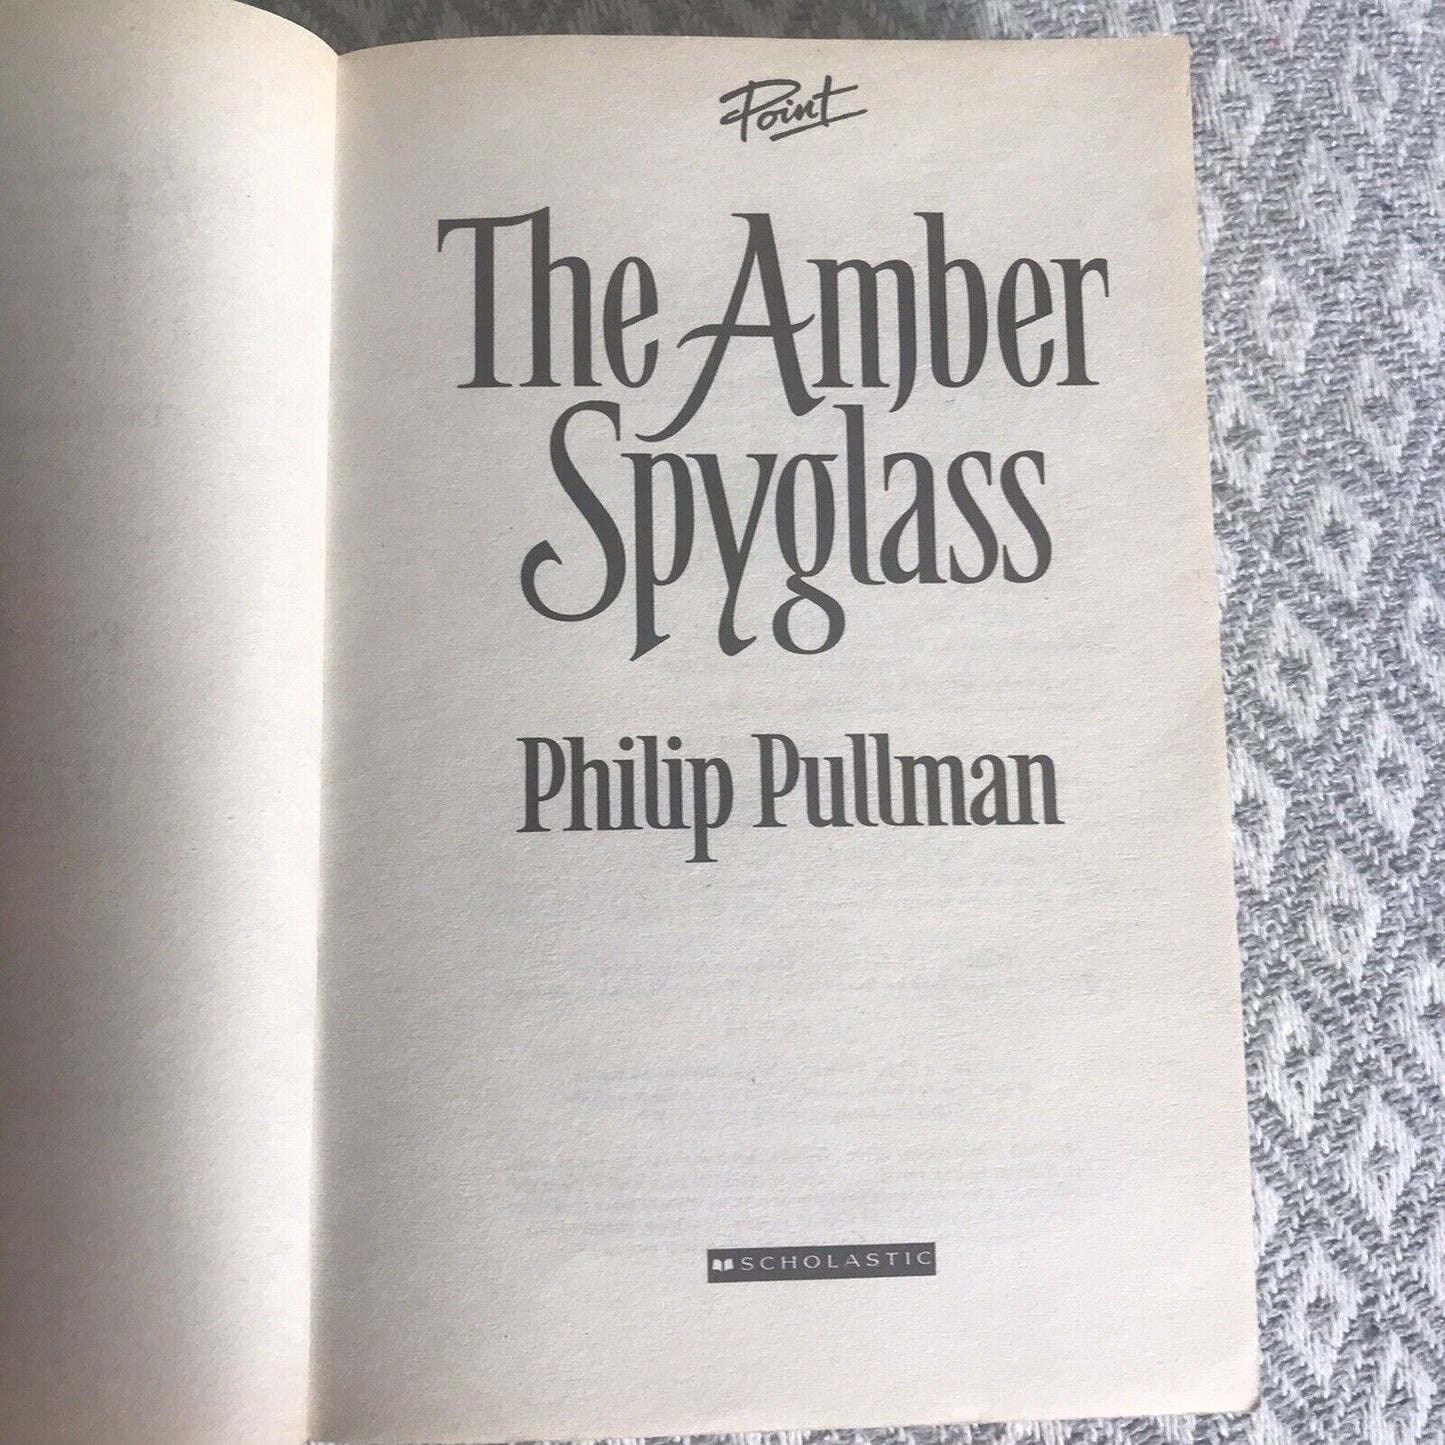 His Dark Materials: #3 The Amber Spyglass by Philip Pullman (Paperback, 2001)